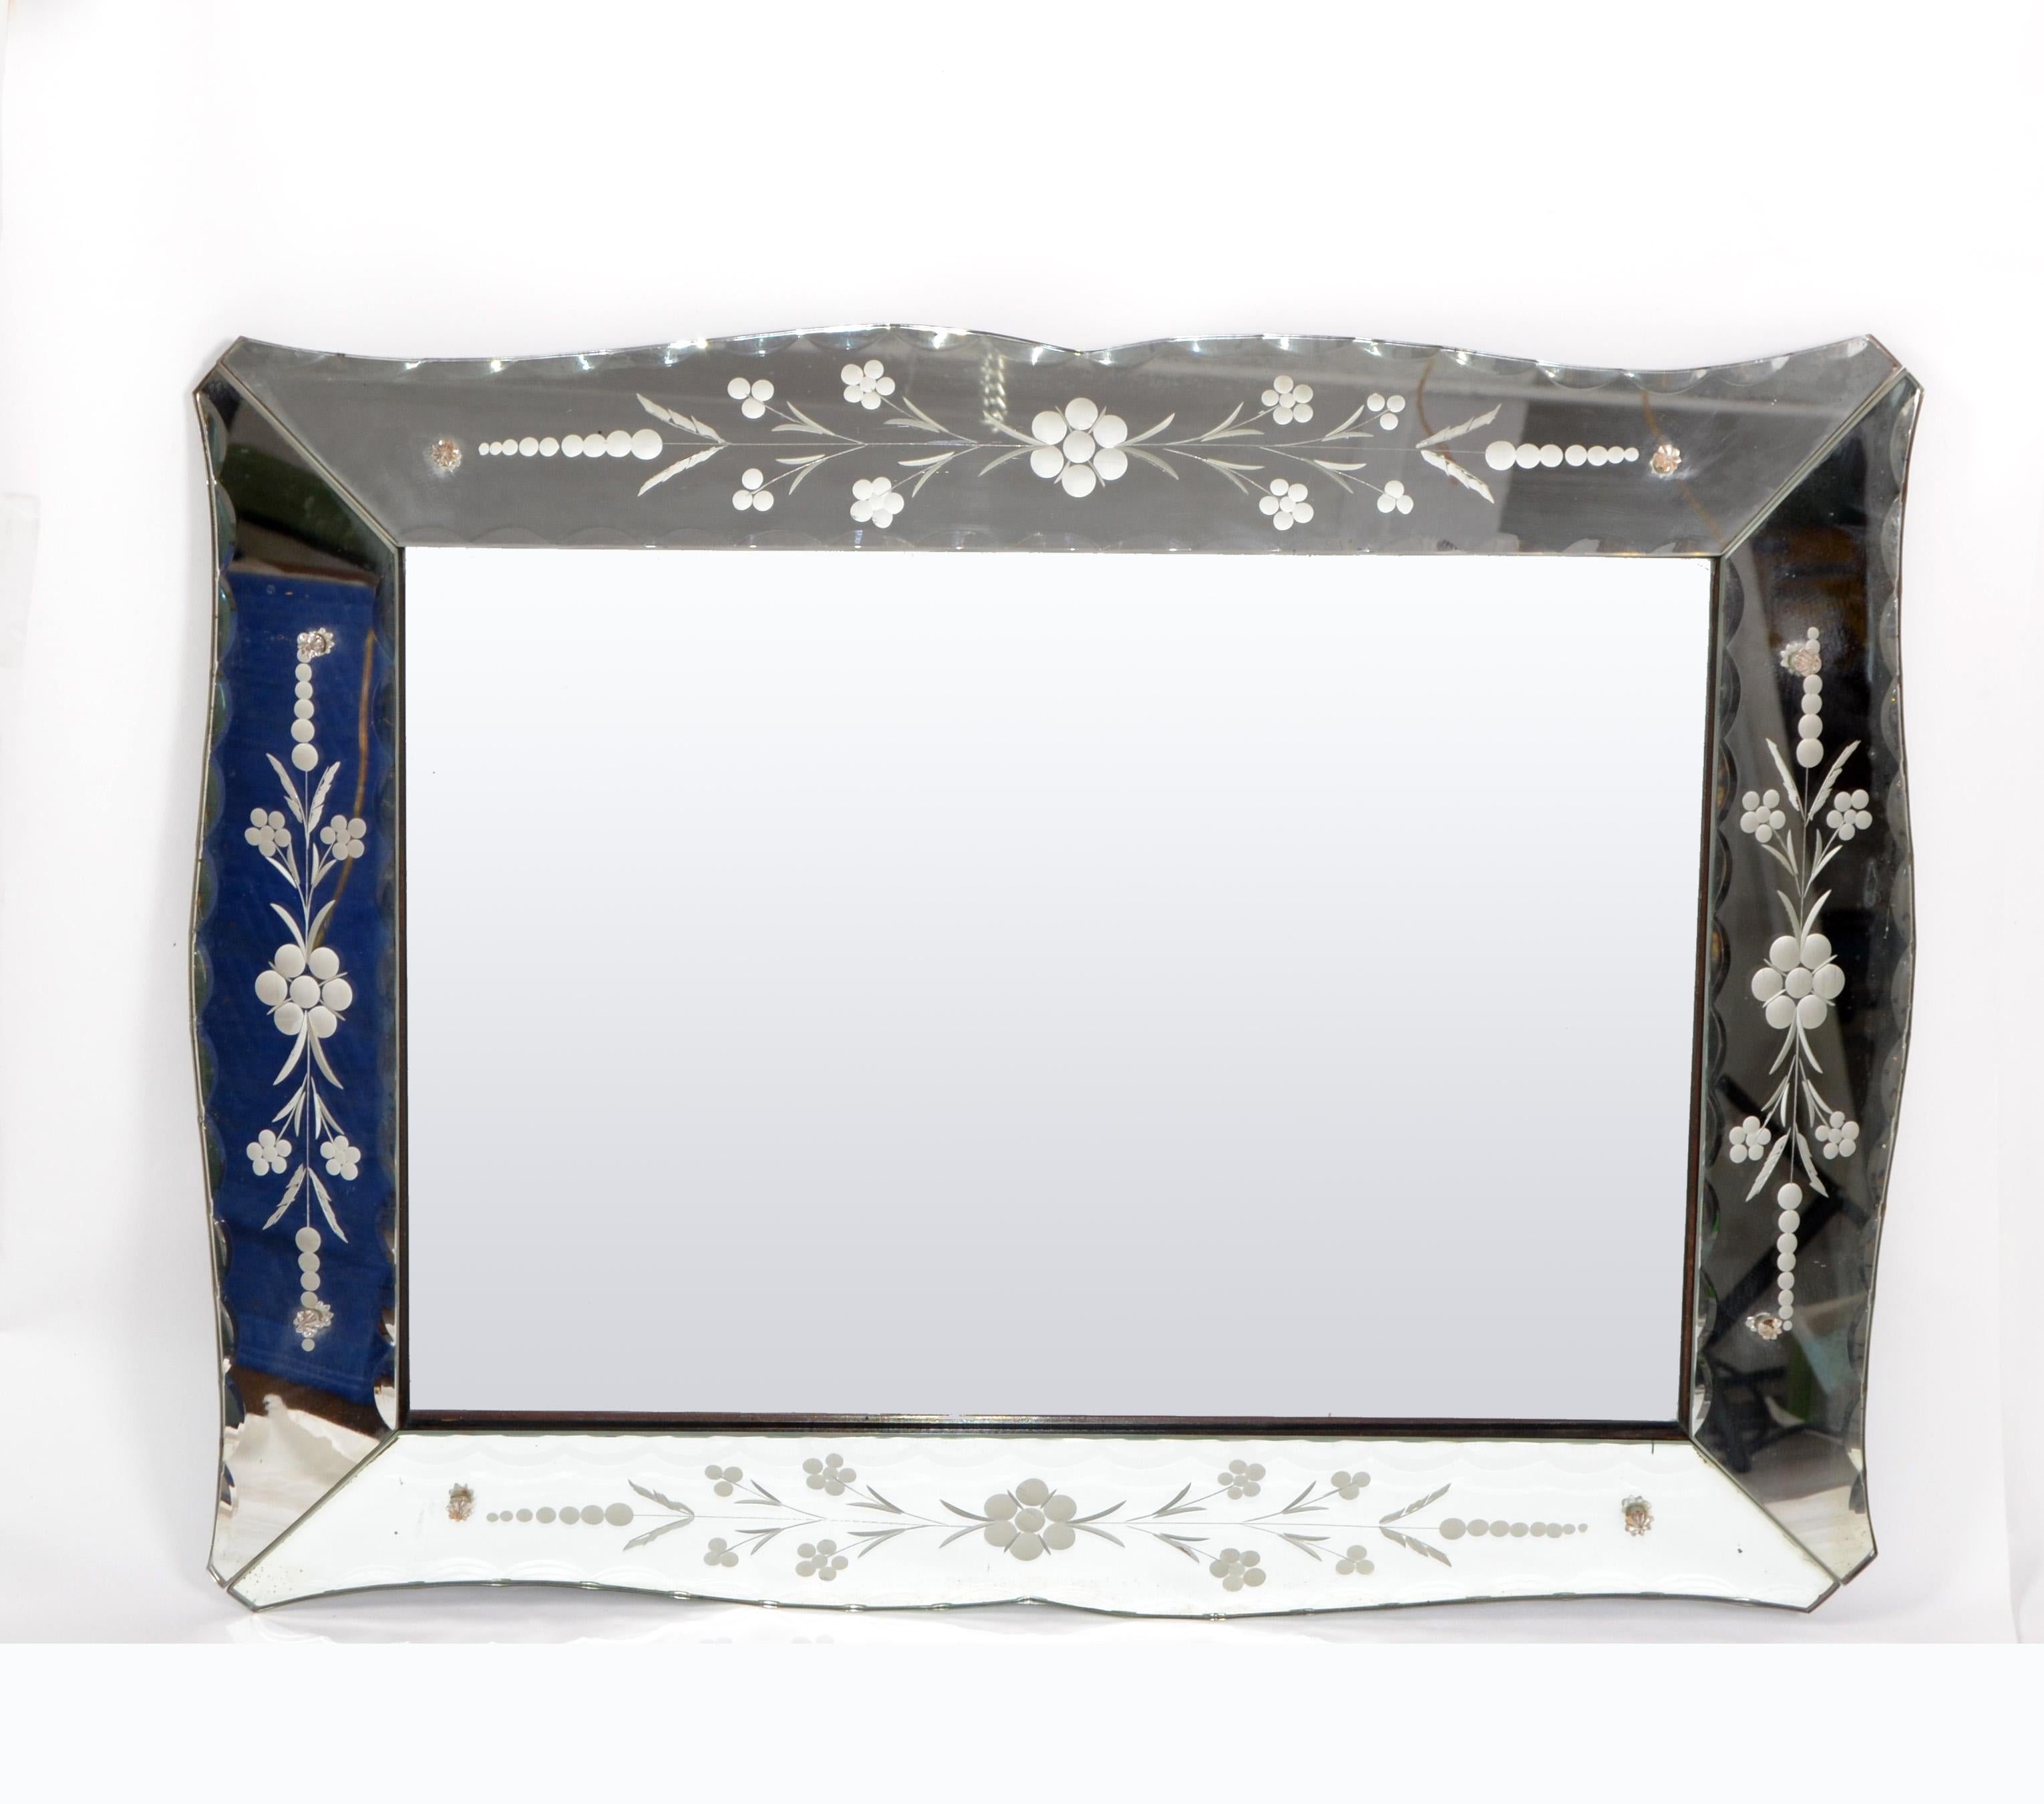 Italian Mid-Century Modern Venetian wall mirror with scalloped edge.
Flower etching on the mirrored side panels separated by faceted corner and beads.
Very impressive Venetian mirror.
  